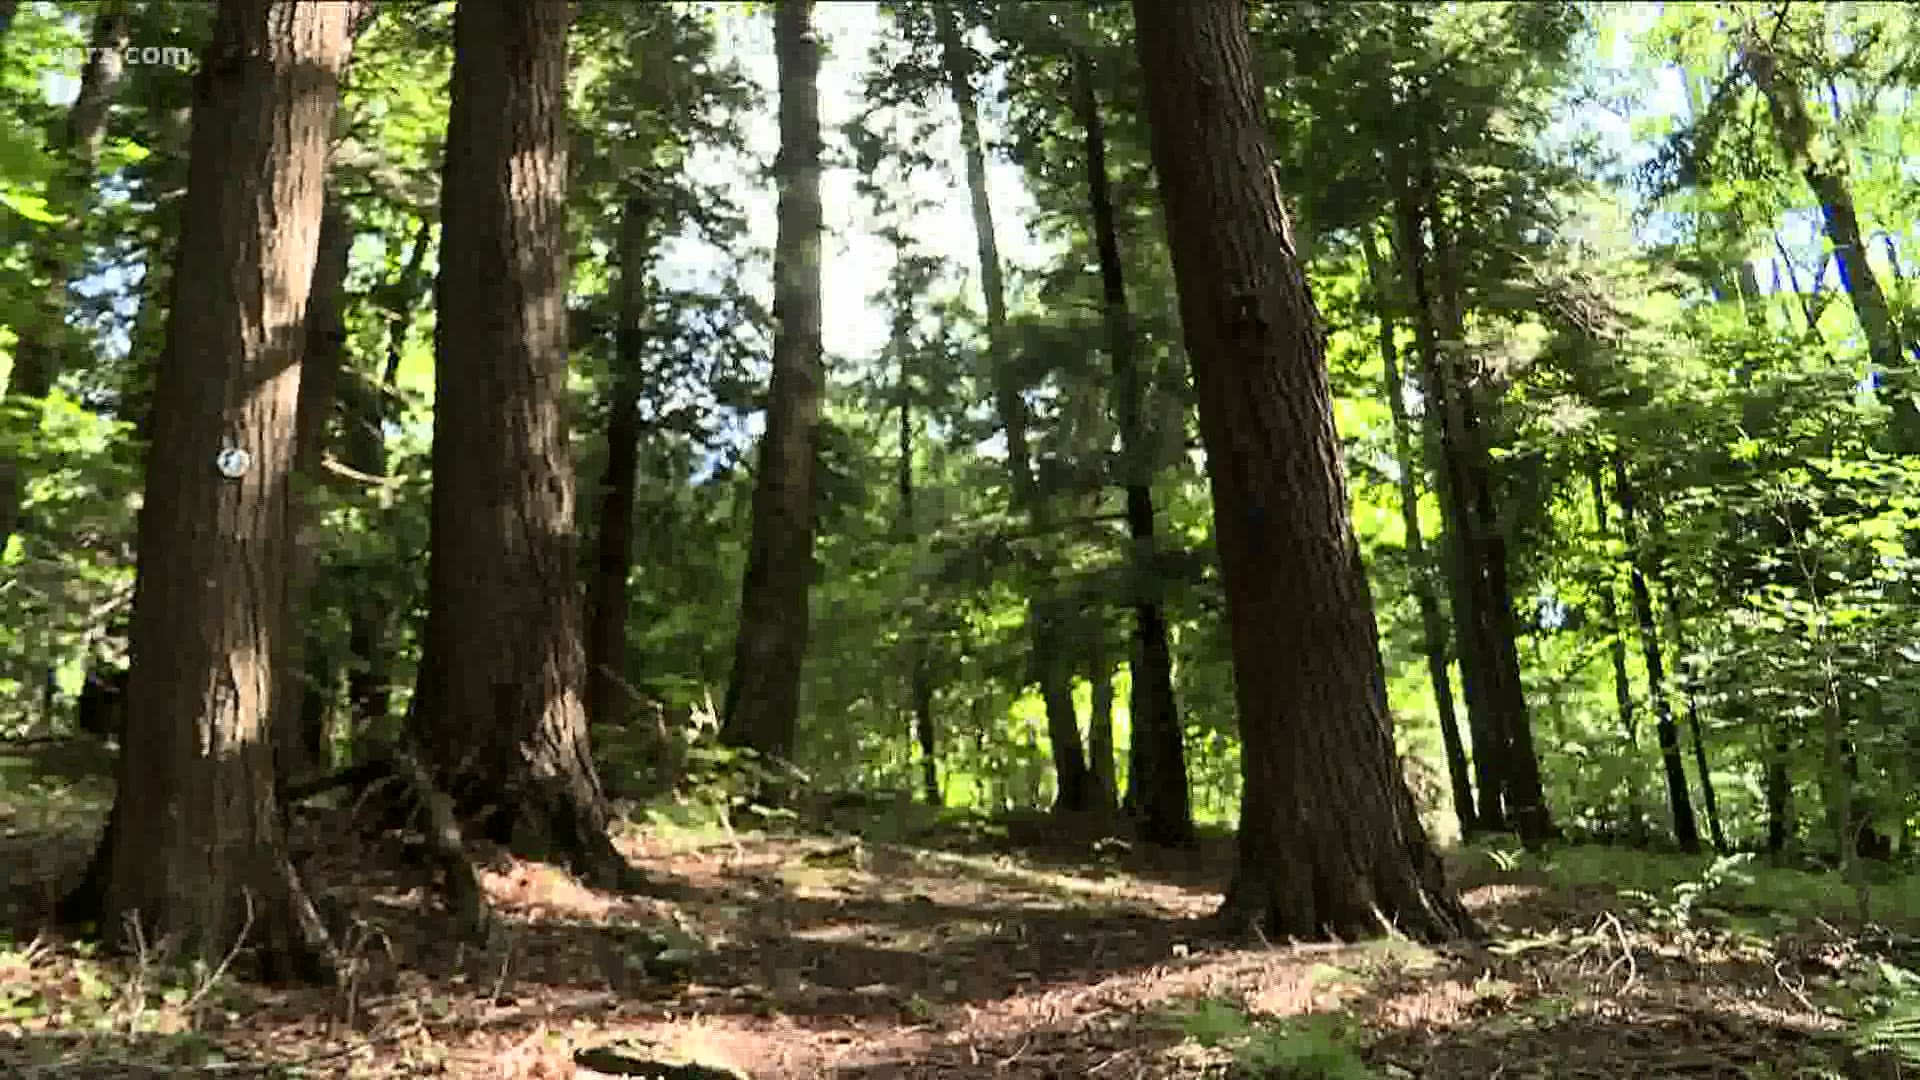 WNY Land Conservancy seeks to purchase the forest and preserve it forever.